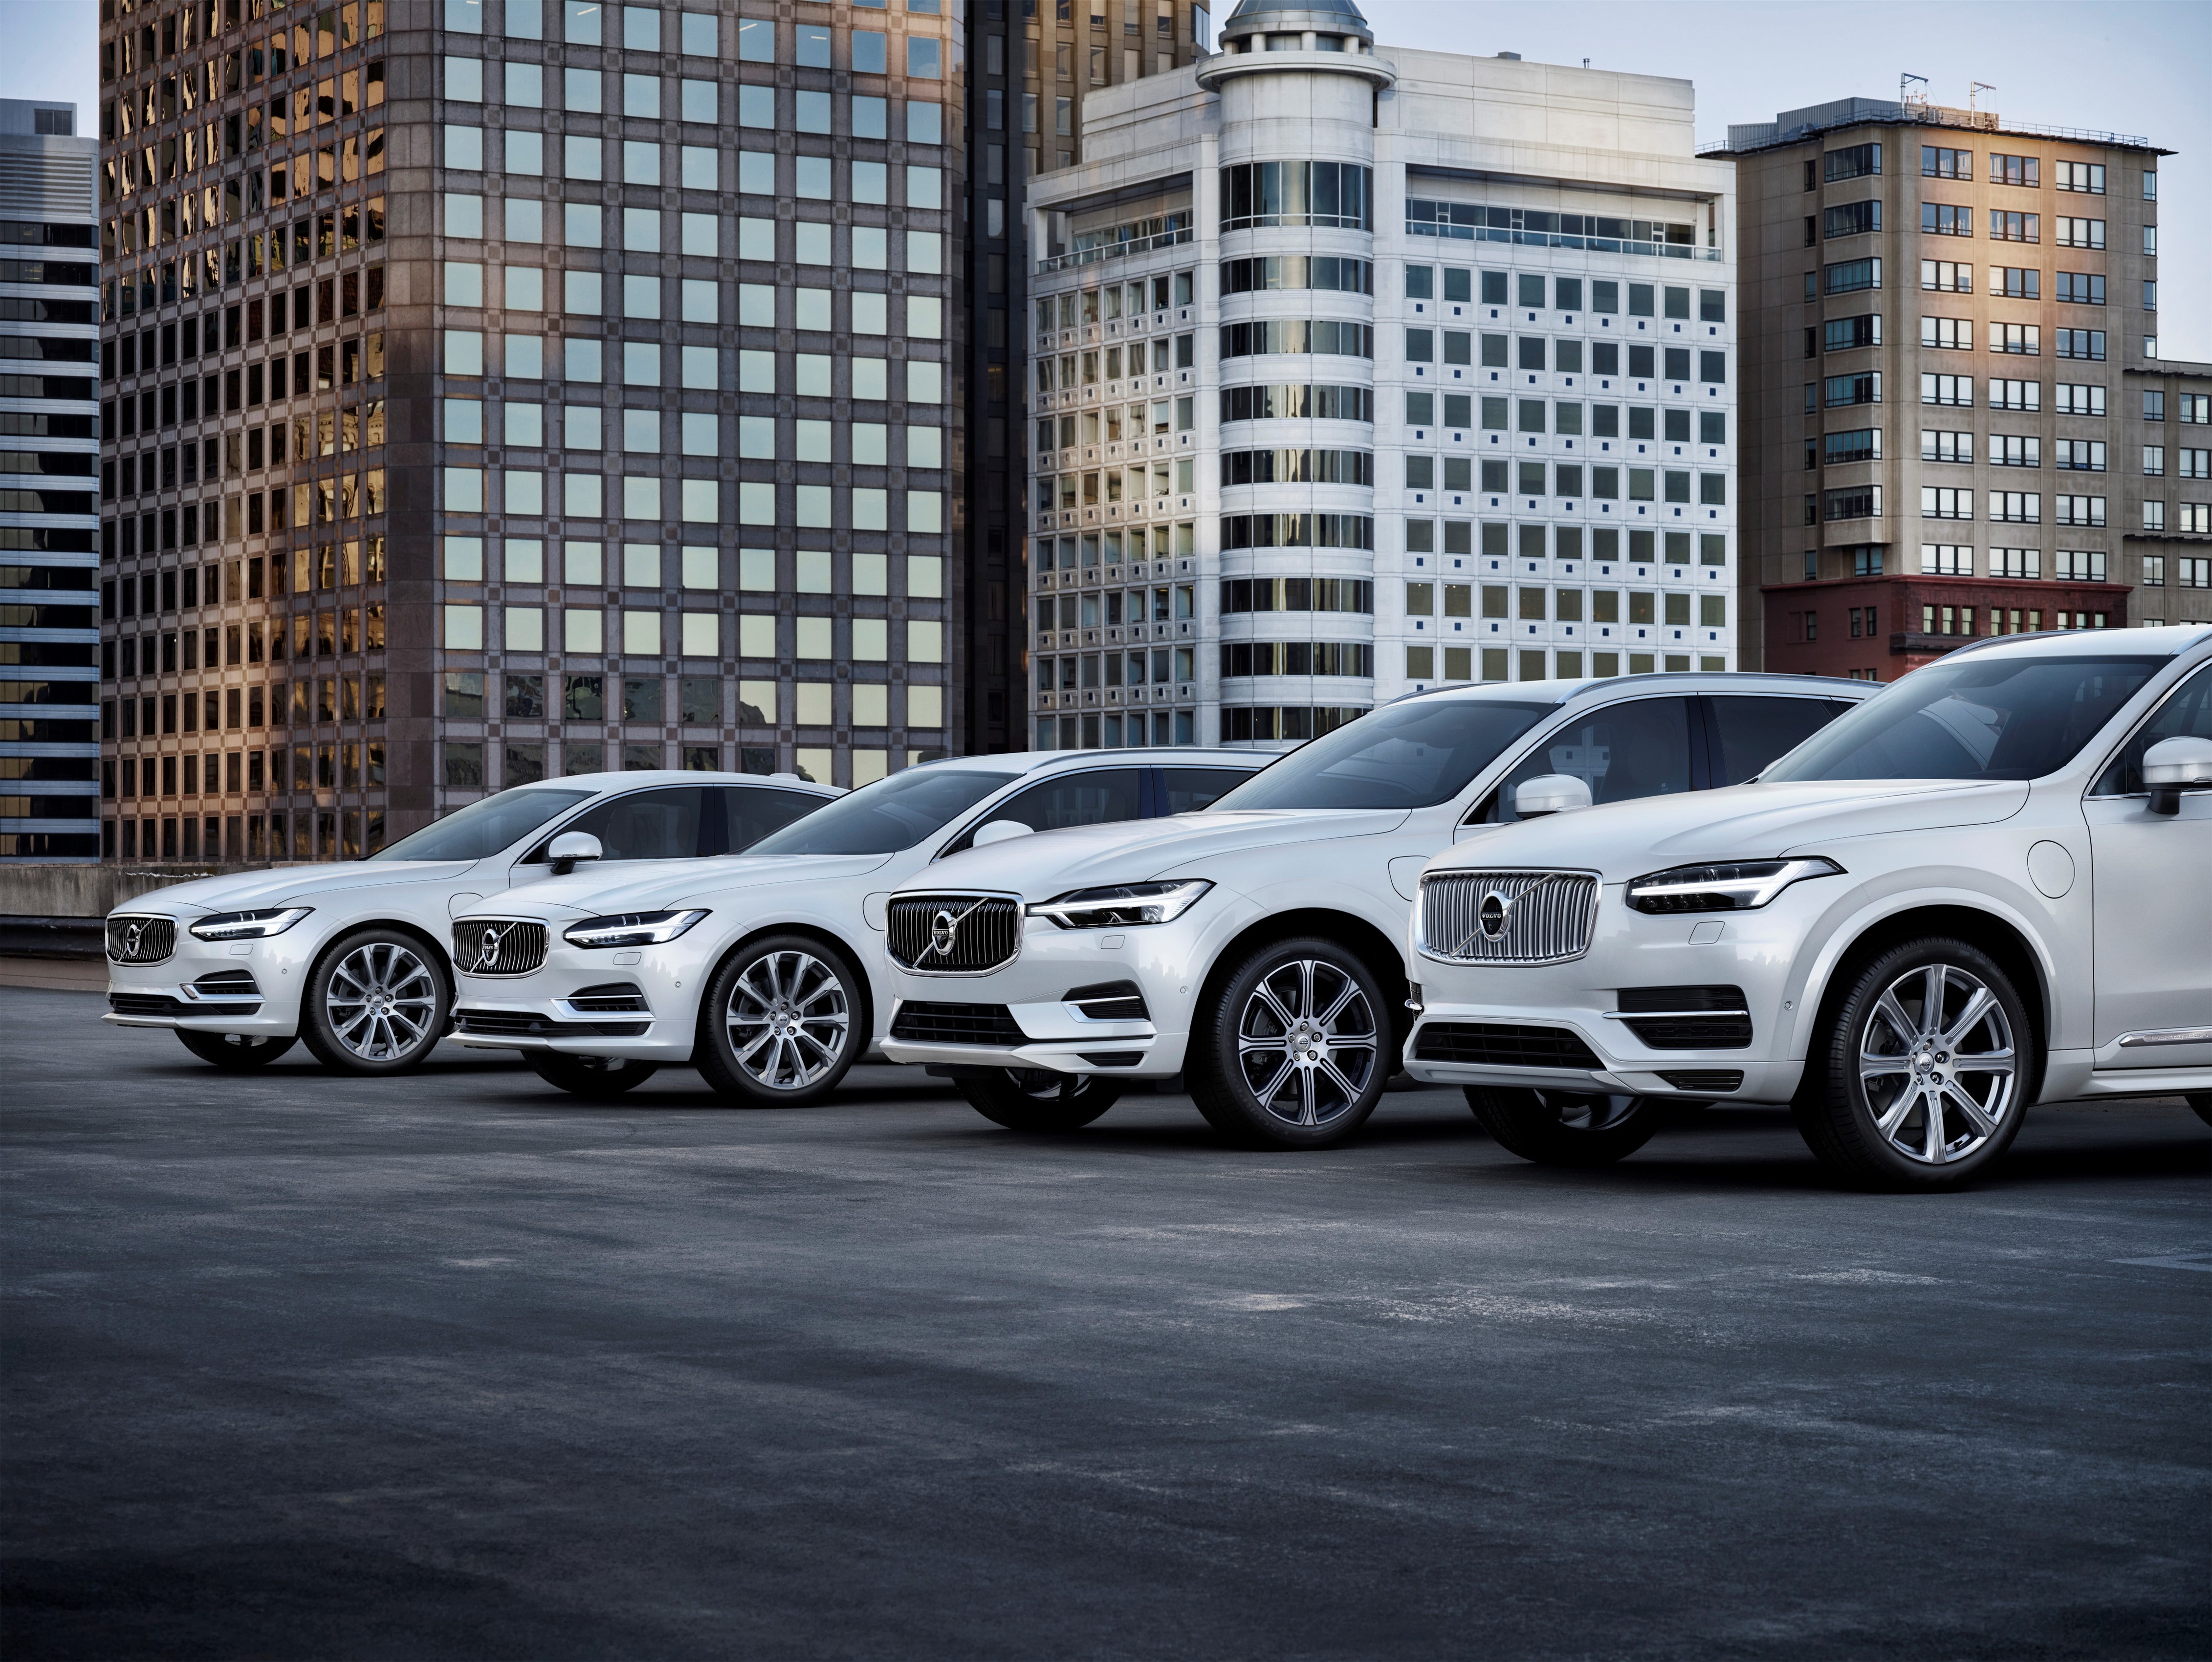 Volvo Says From 2019 All New Models It Introduces Will Be Electric